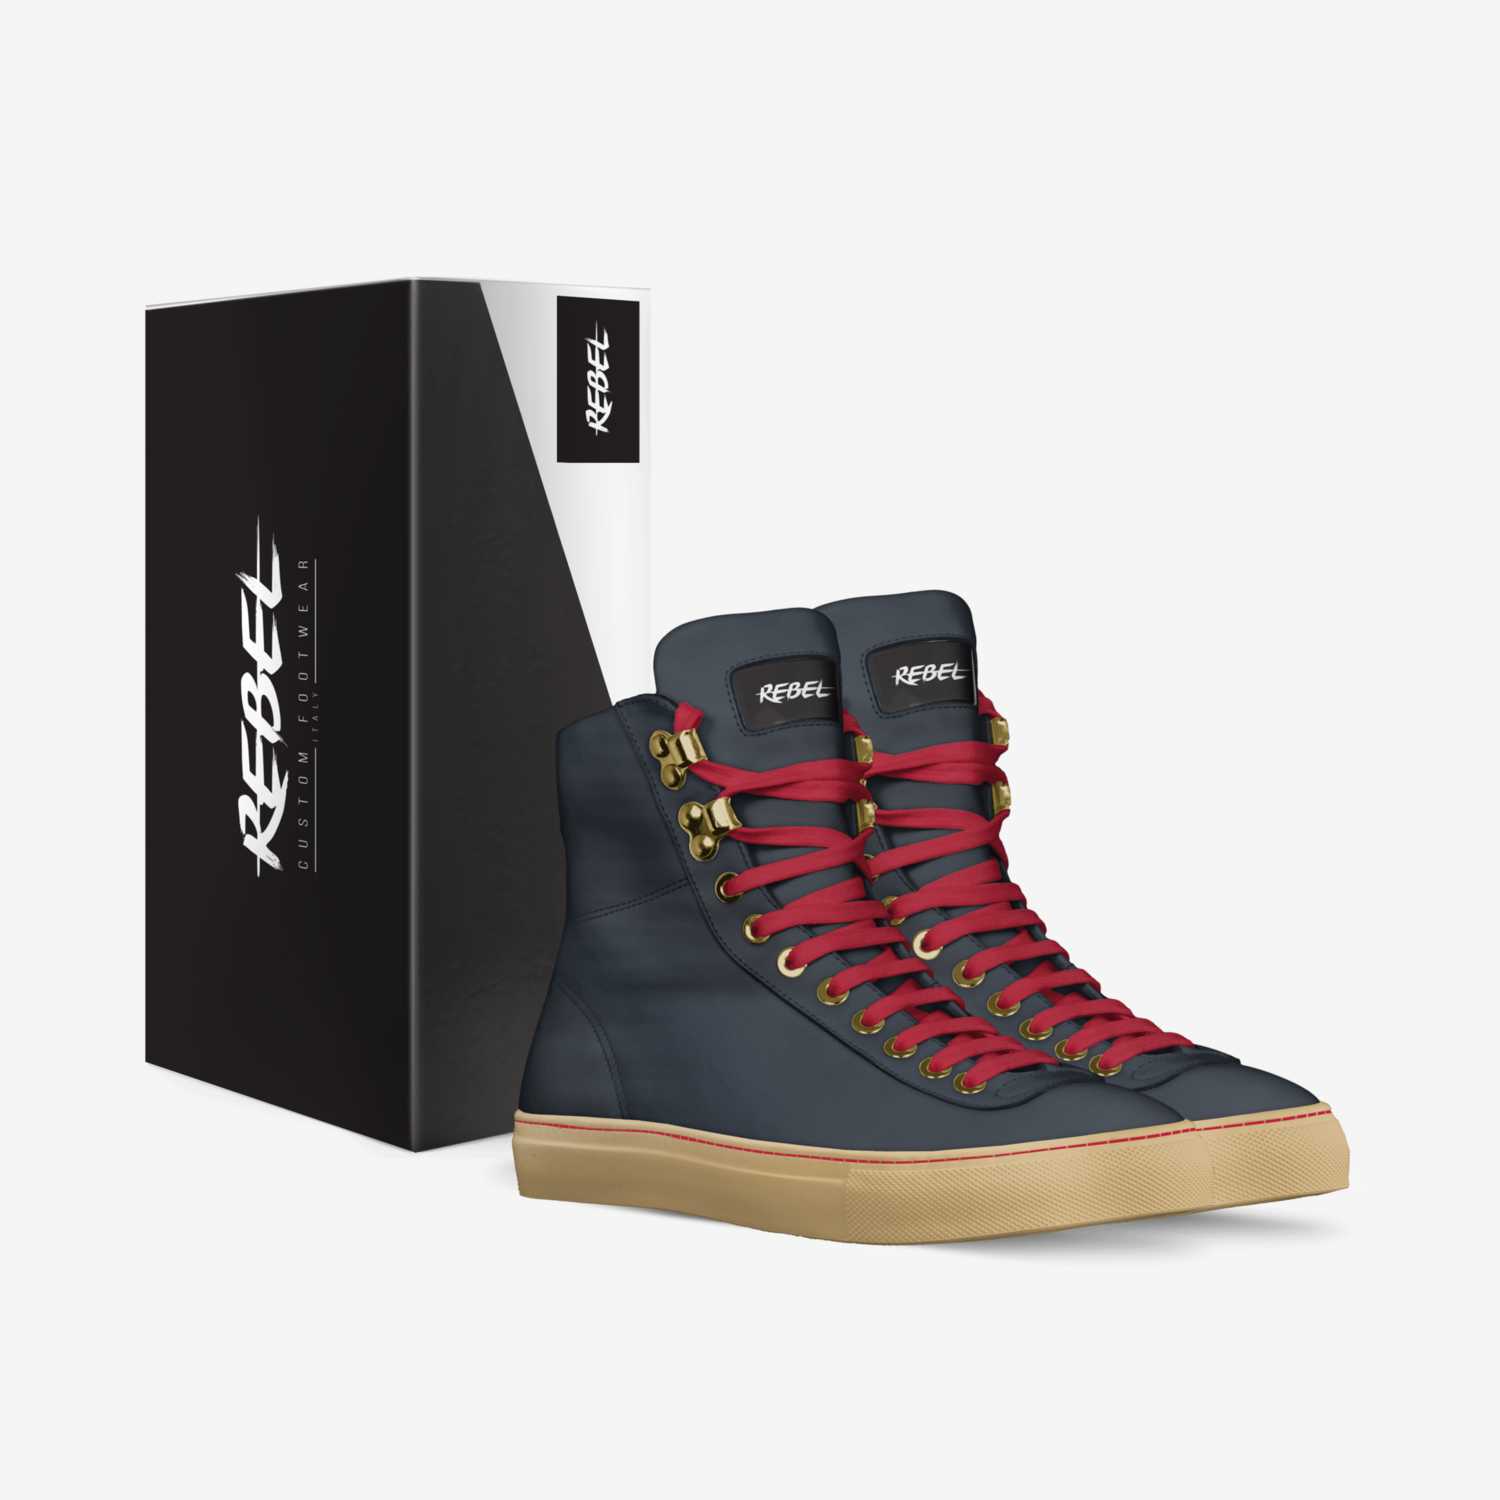 The Rebel custom made in Italy shoes by Rebel Footwear | Box view